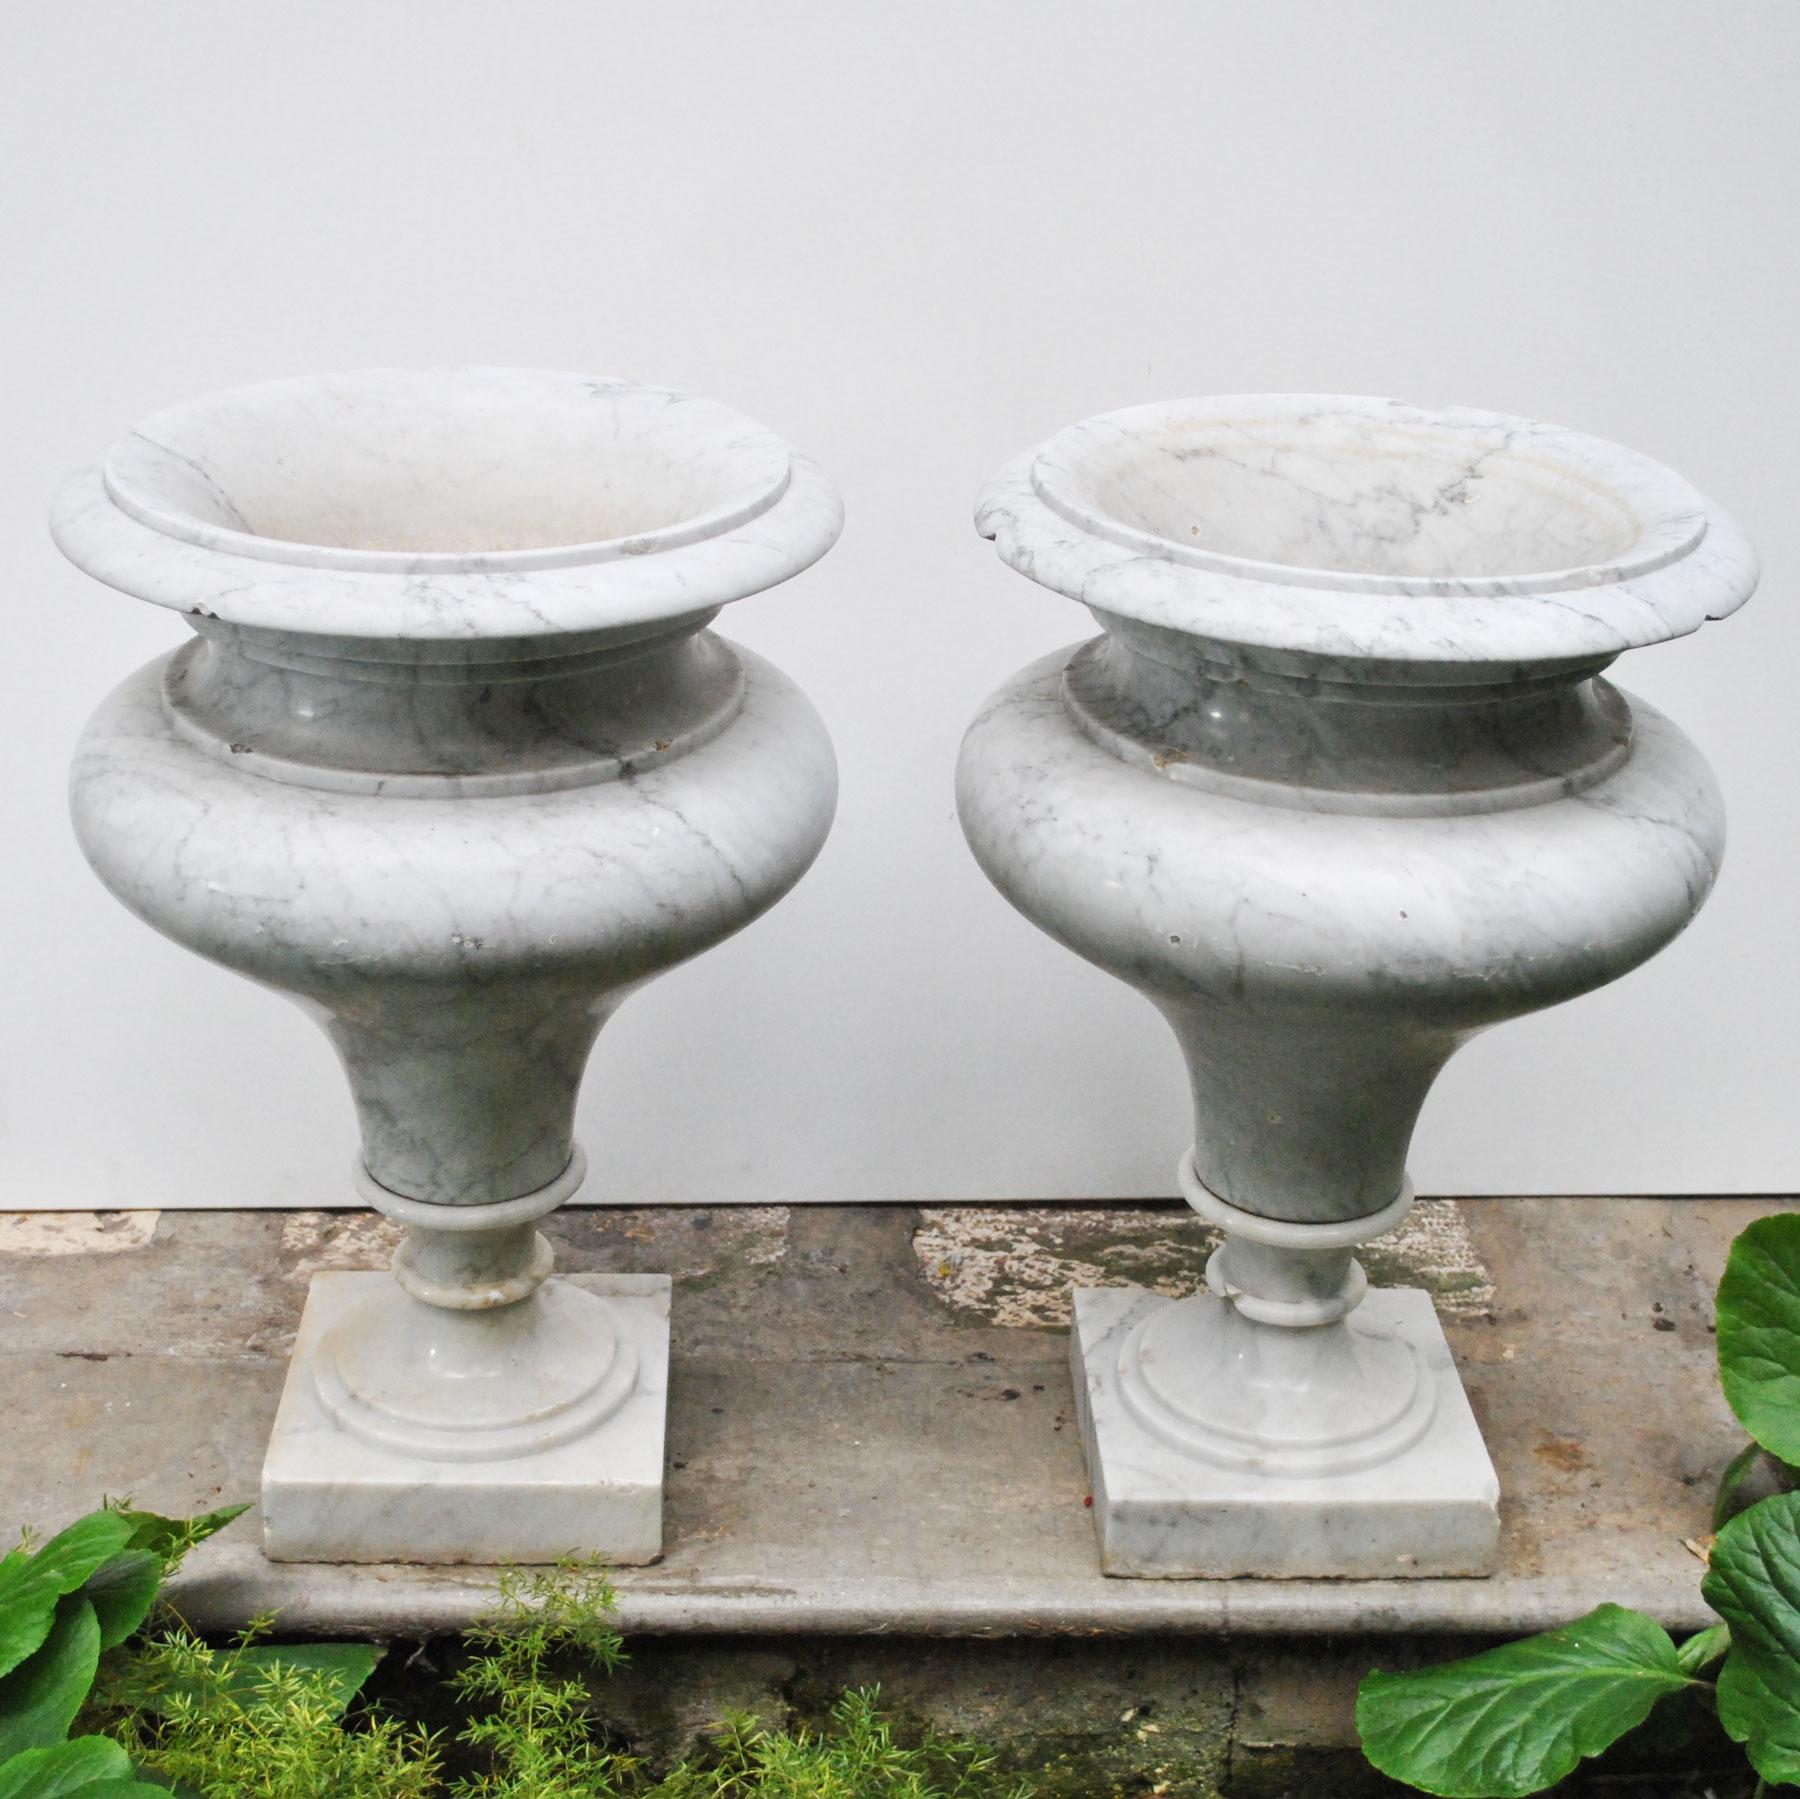 Elegant Pair of Large Carrara Marble Vases, Period Early 20th Century For Sale 1